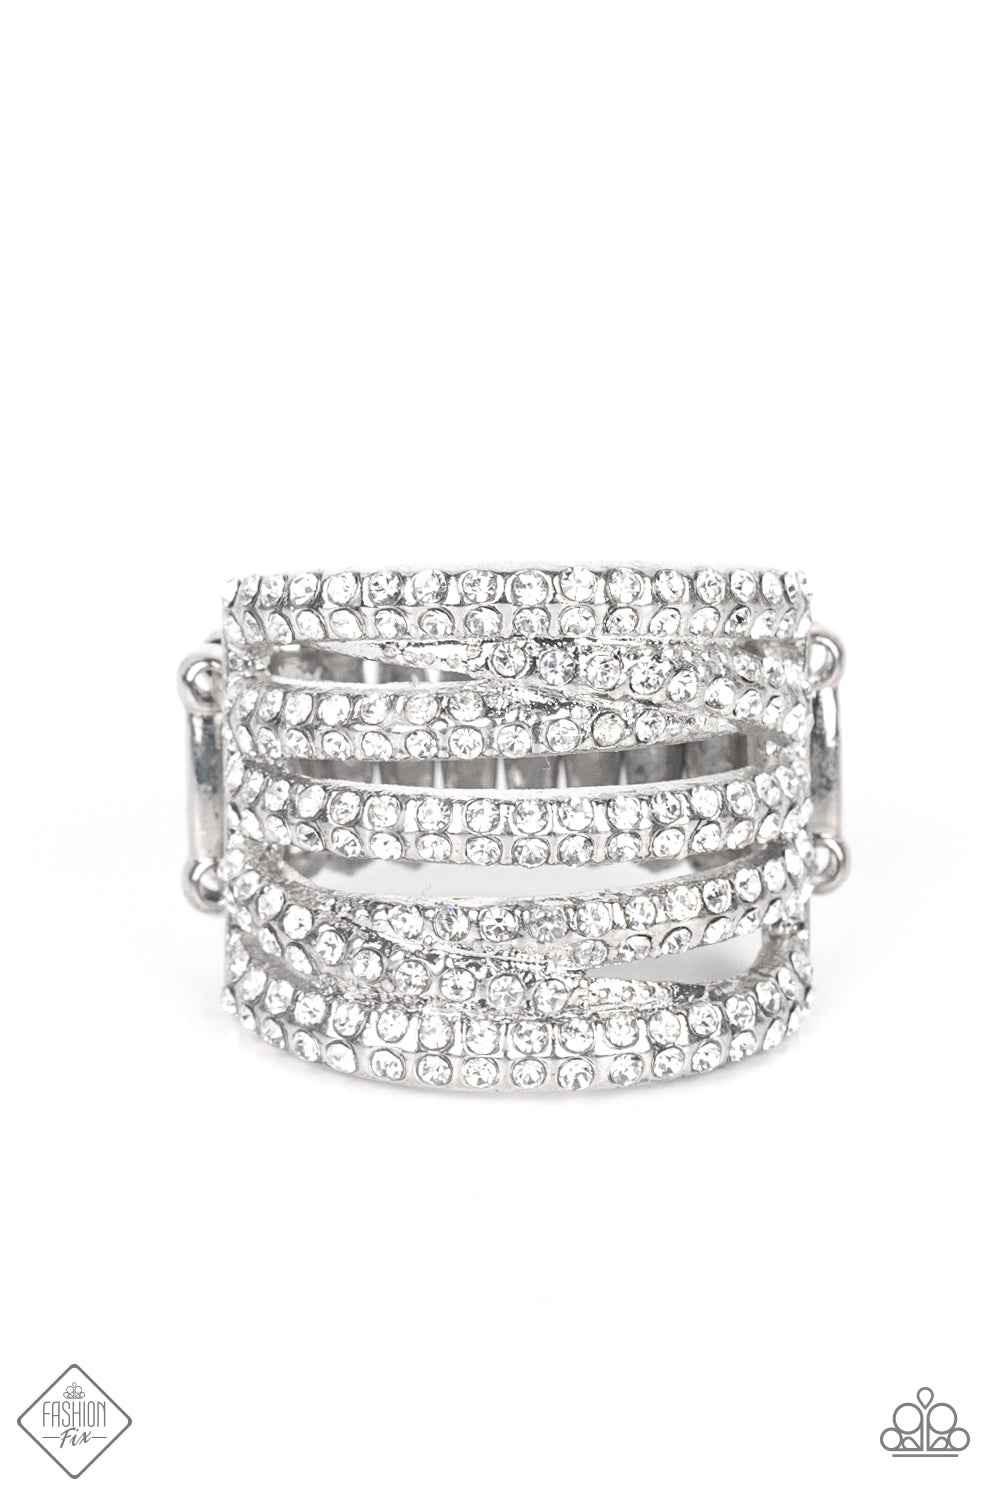 Knock-Out Opulence - White and Silver Fashion Ring - Paparazzi Accessories - Encrusted in dainty pairs of blinding white rhinestones, row after row of glitzy silver bands stack and crisscross across the finger for a knockout look. Features a stretchy band for a flexible fit. Trendy fashion jewelry for everyone.